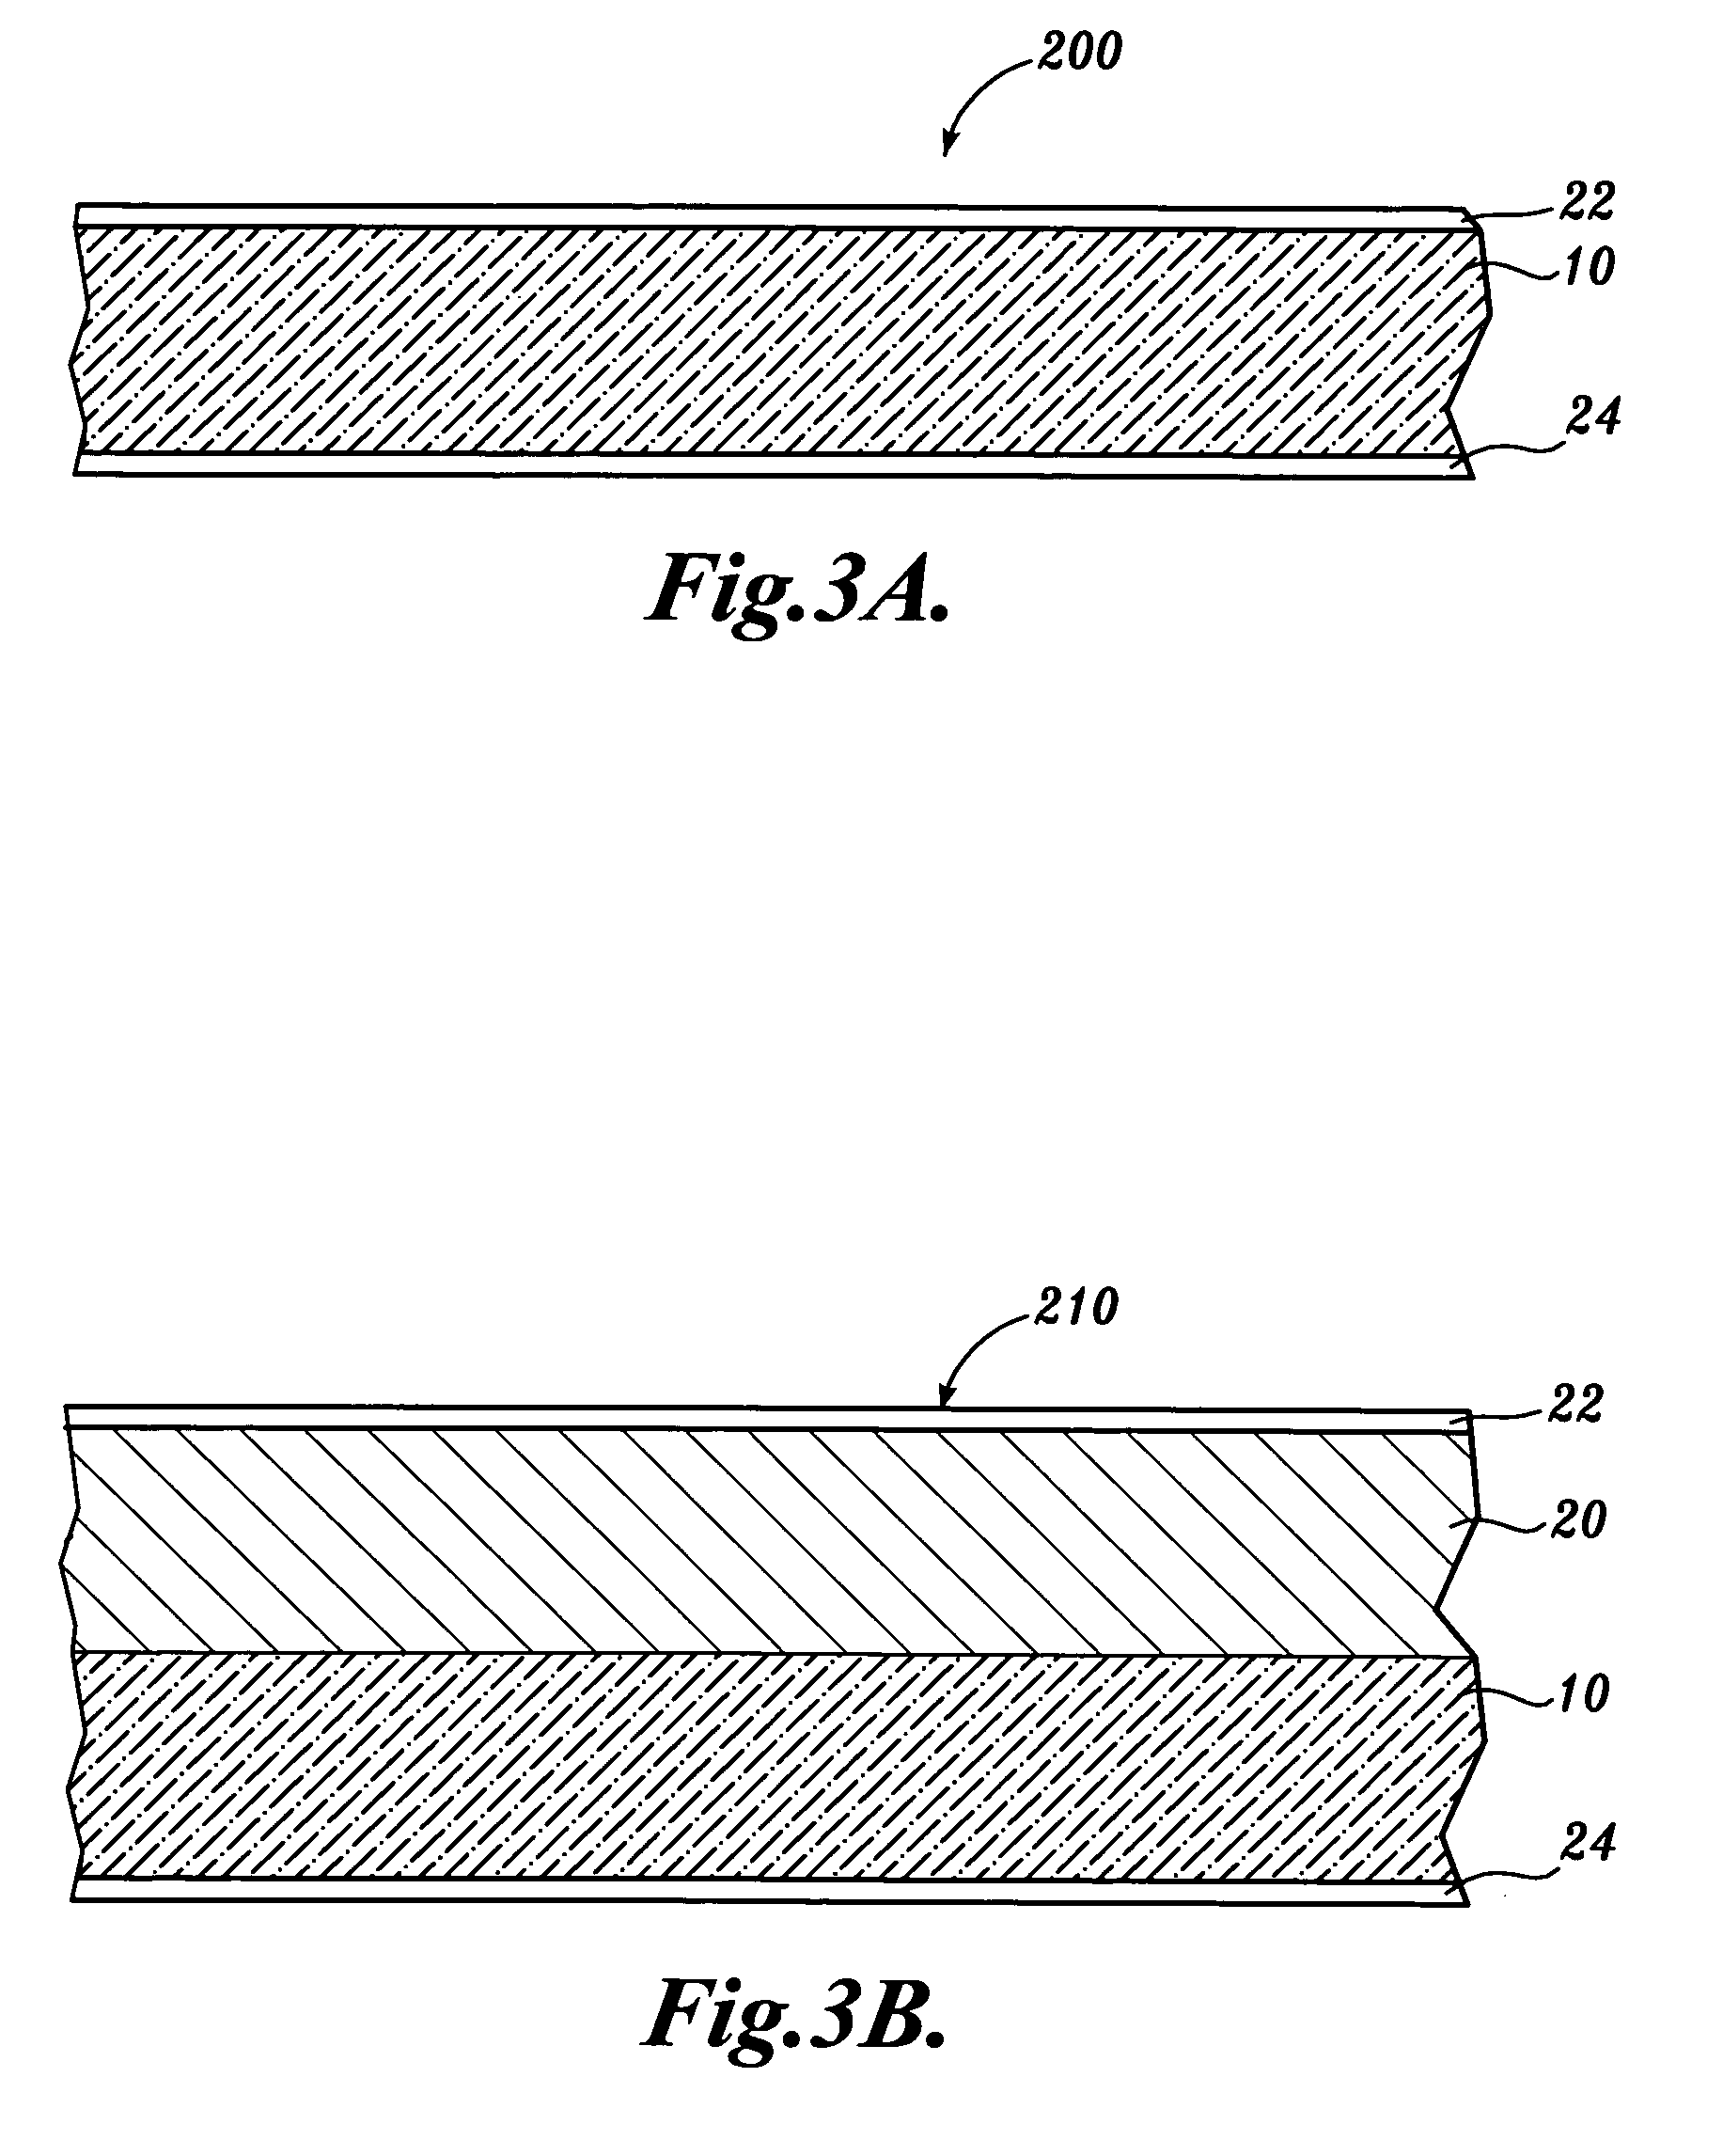 Method for making carboxyalkyl cellulose